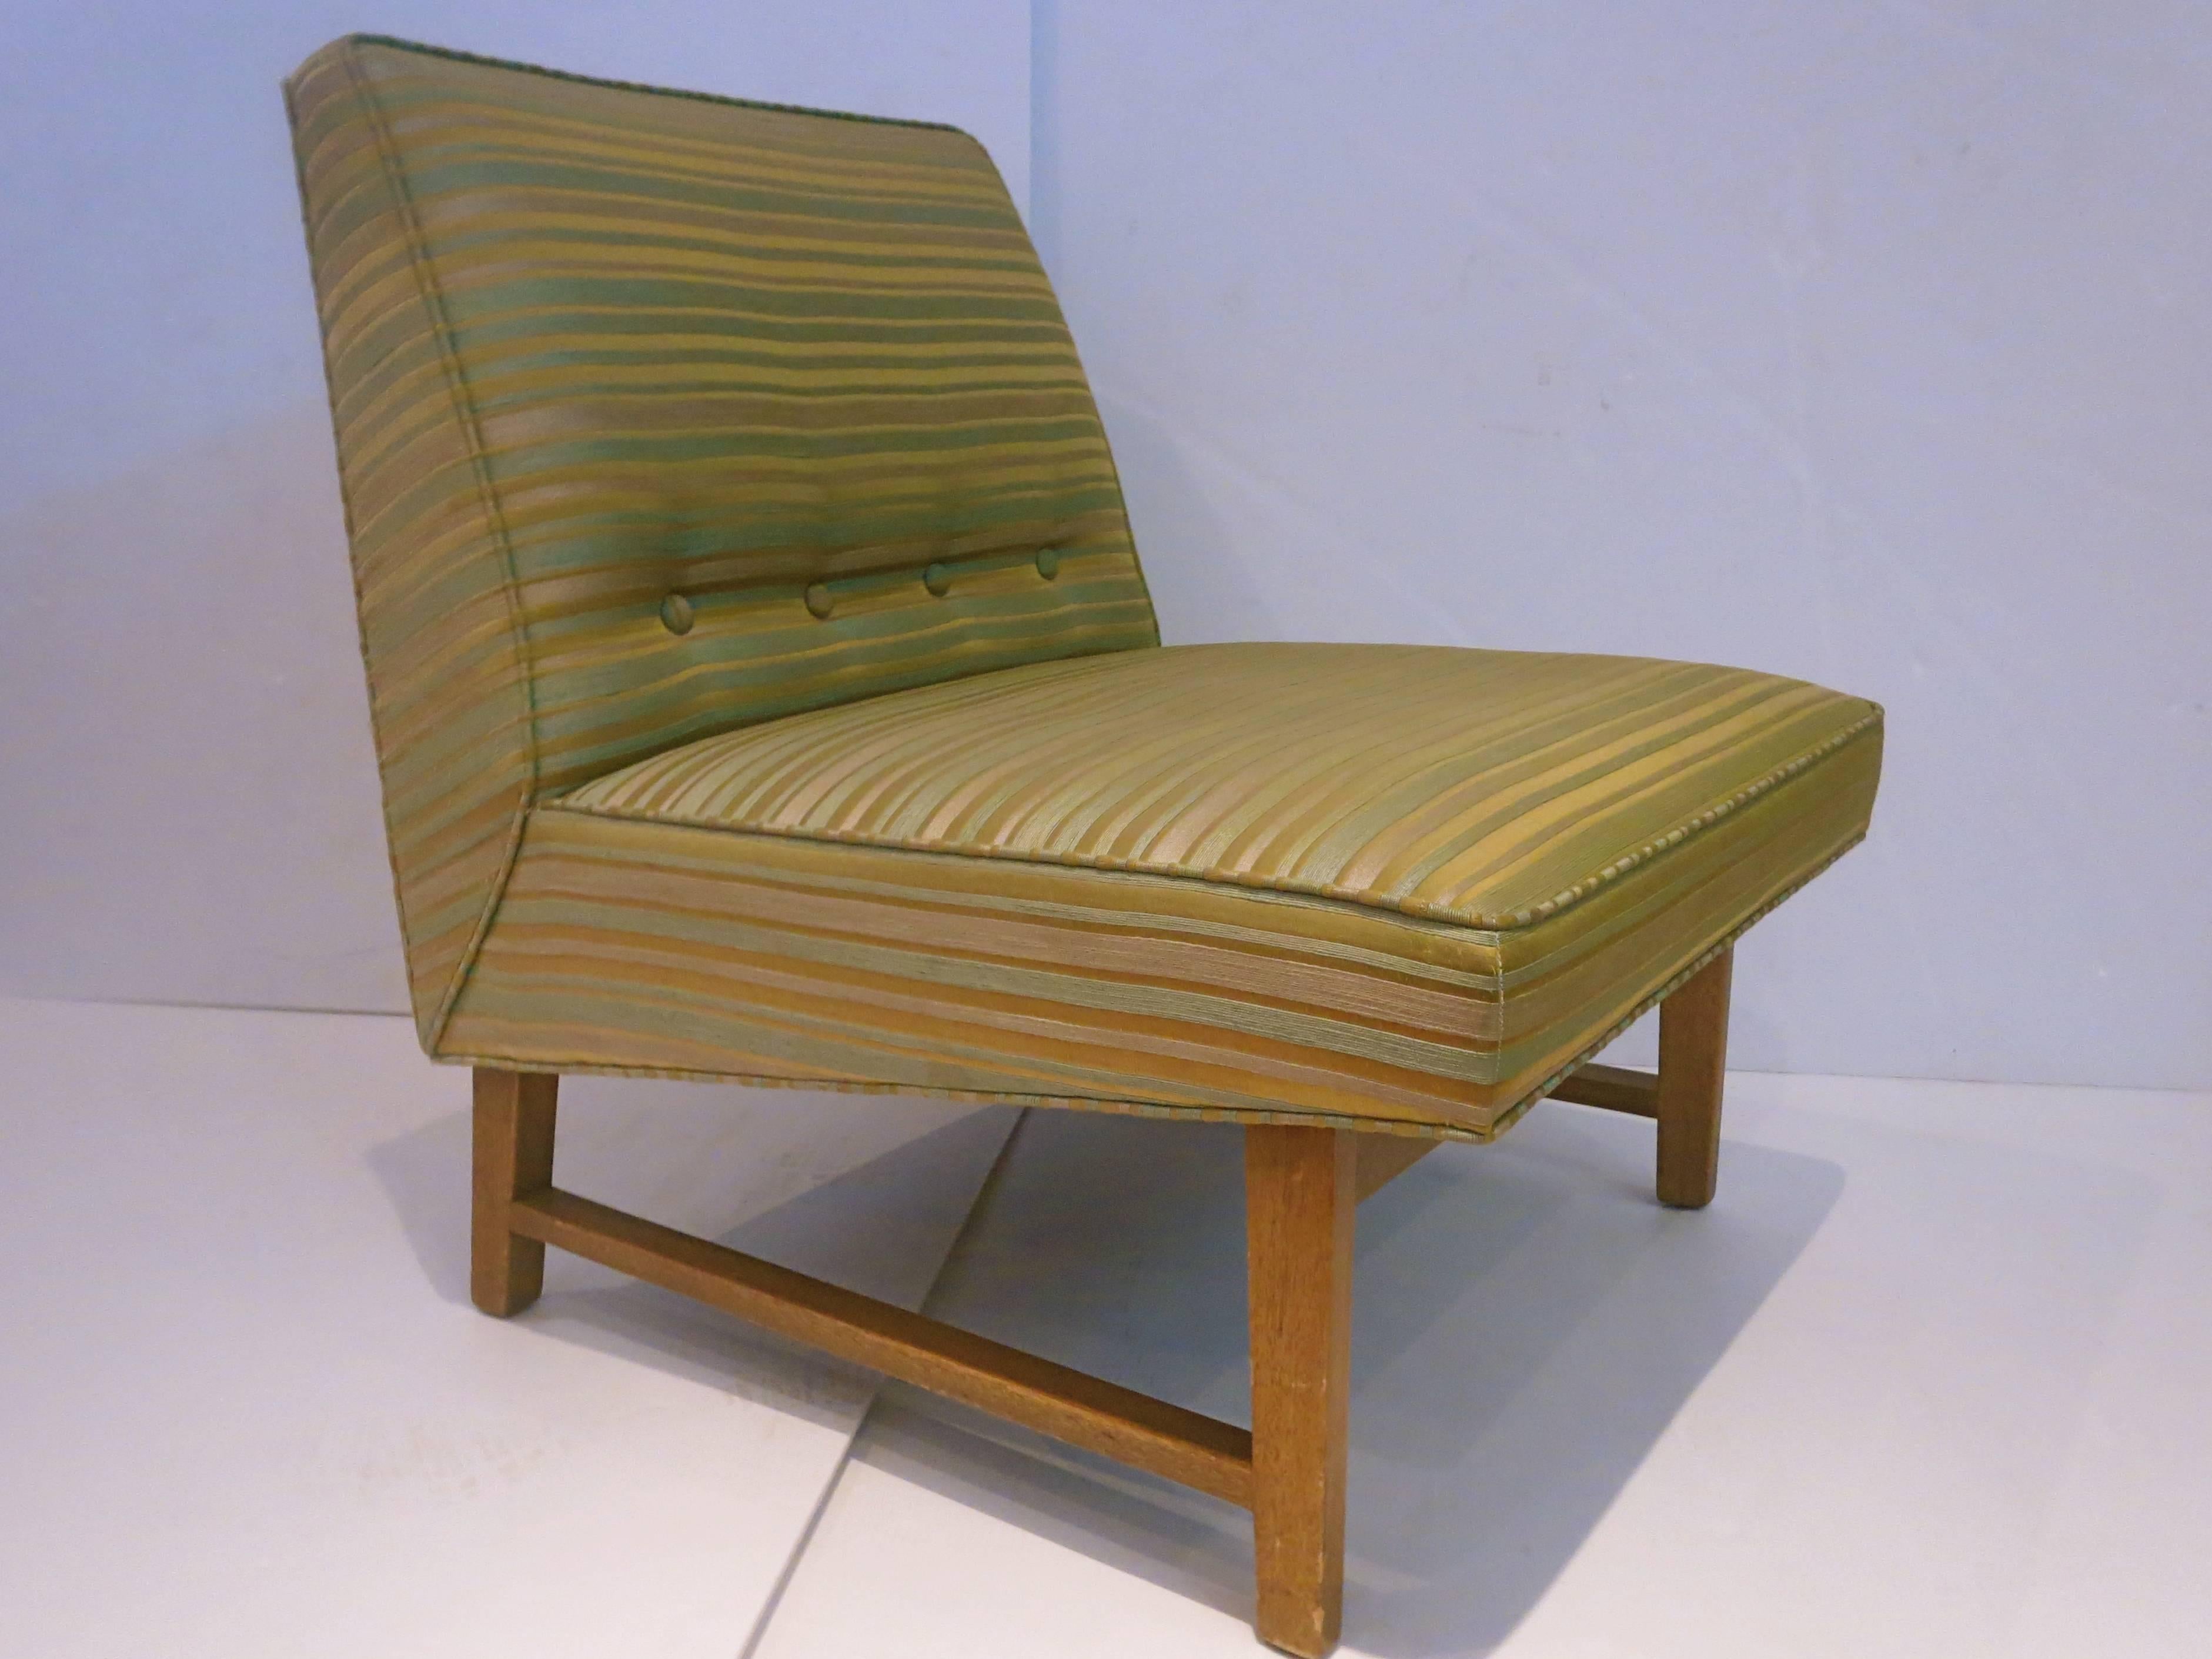 A hard to find single slipper chair designed by Edward Wormley for Dunbar, circa 1950s all original condition fabric and solid mahogany base, solid and sturdy all original fabric and finish very clean for its age beautiful material.